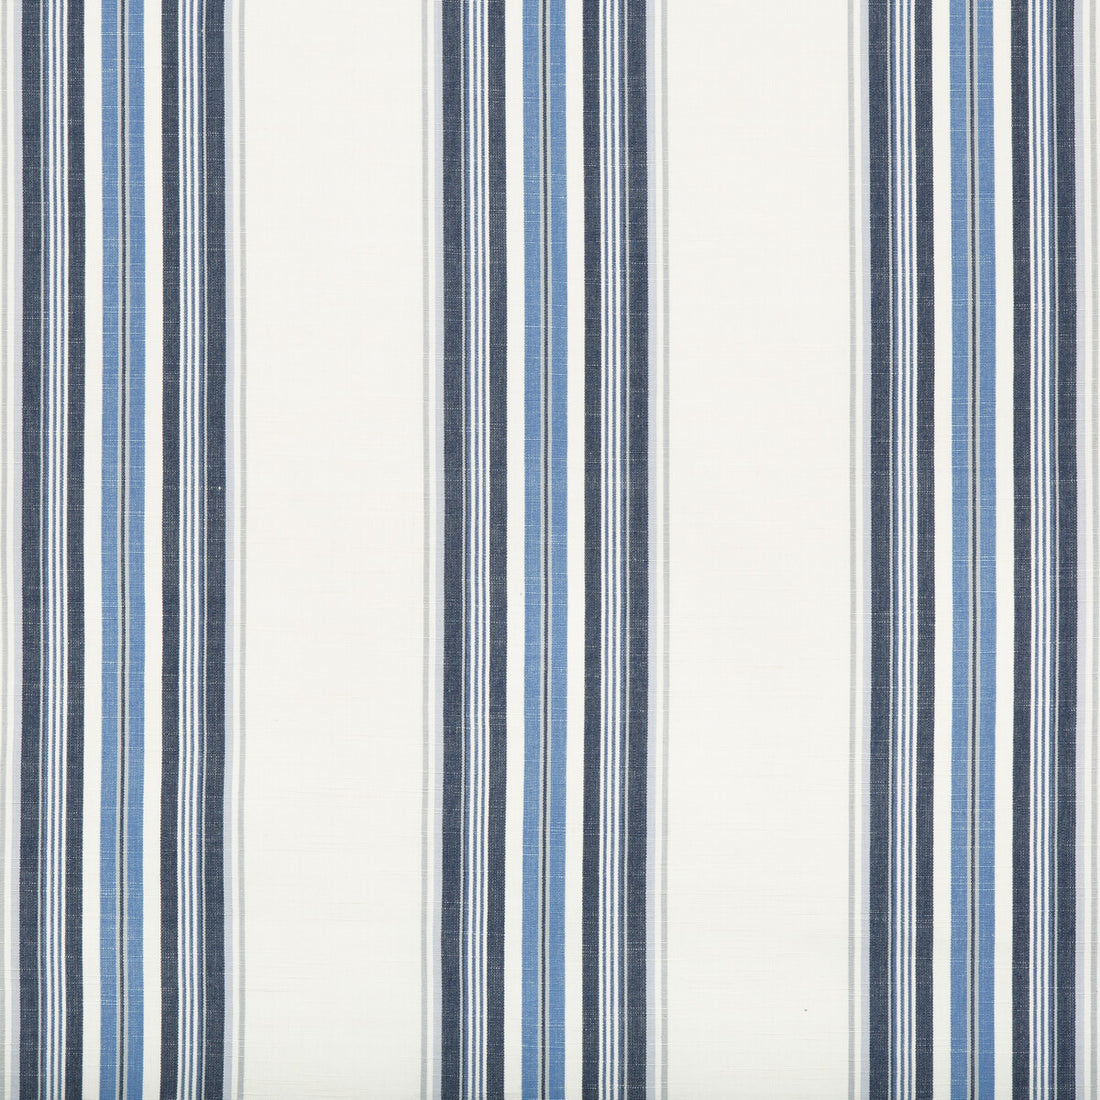 Verdon Stripe fabric in indigo/sky color - pattern 8017101.505.0 - by Brunschwig &amp; Fils in the Durance collection